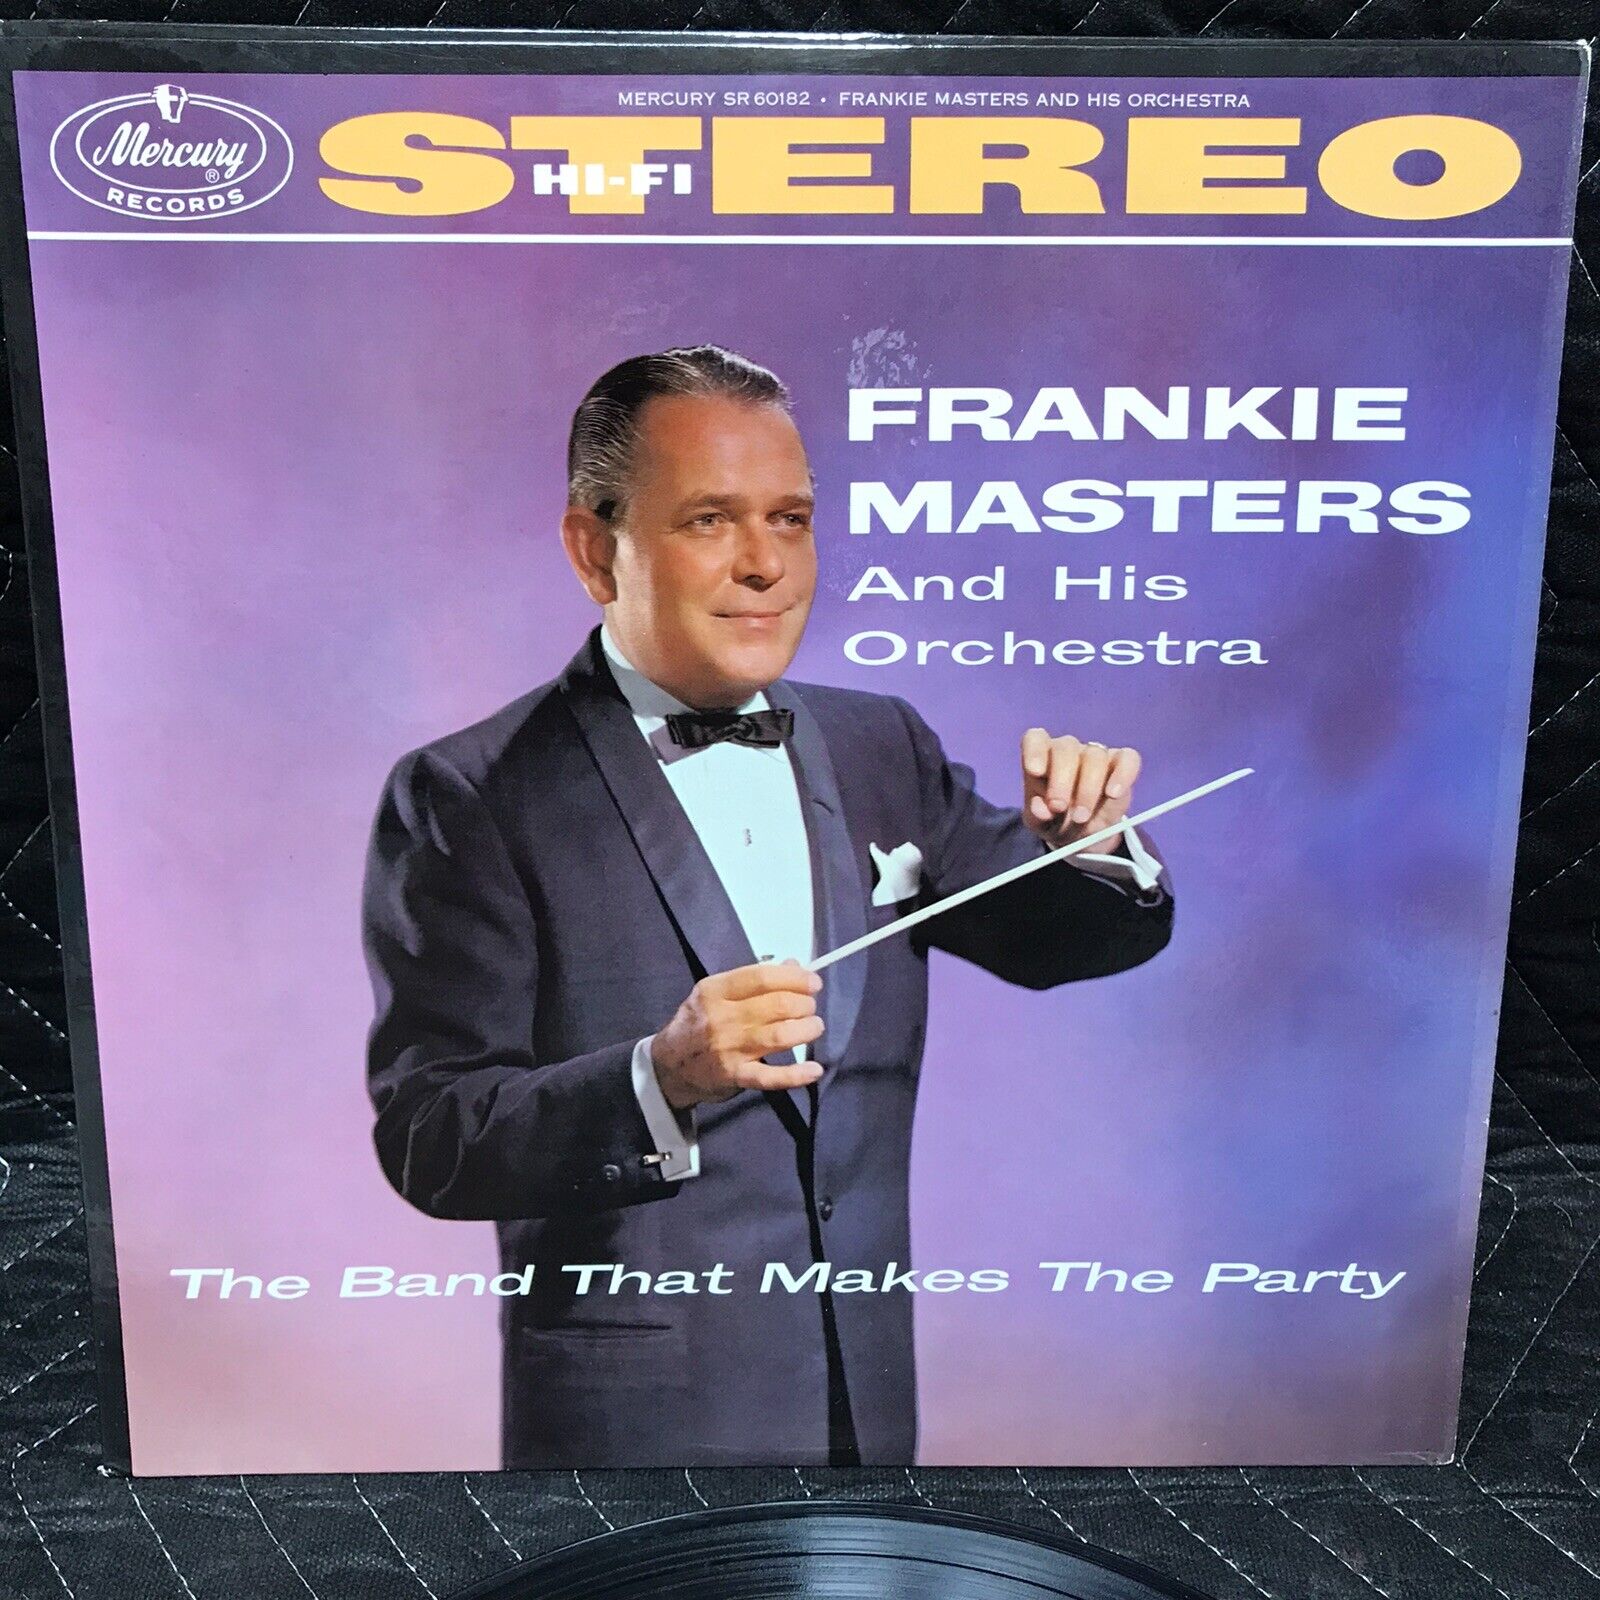 Frankie Masters The Band That Makes the Party LP Mercury SR 60182 Stereo